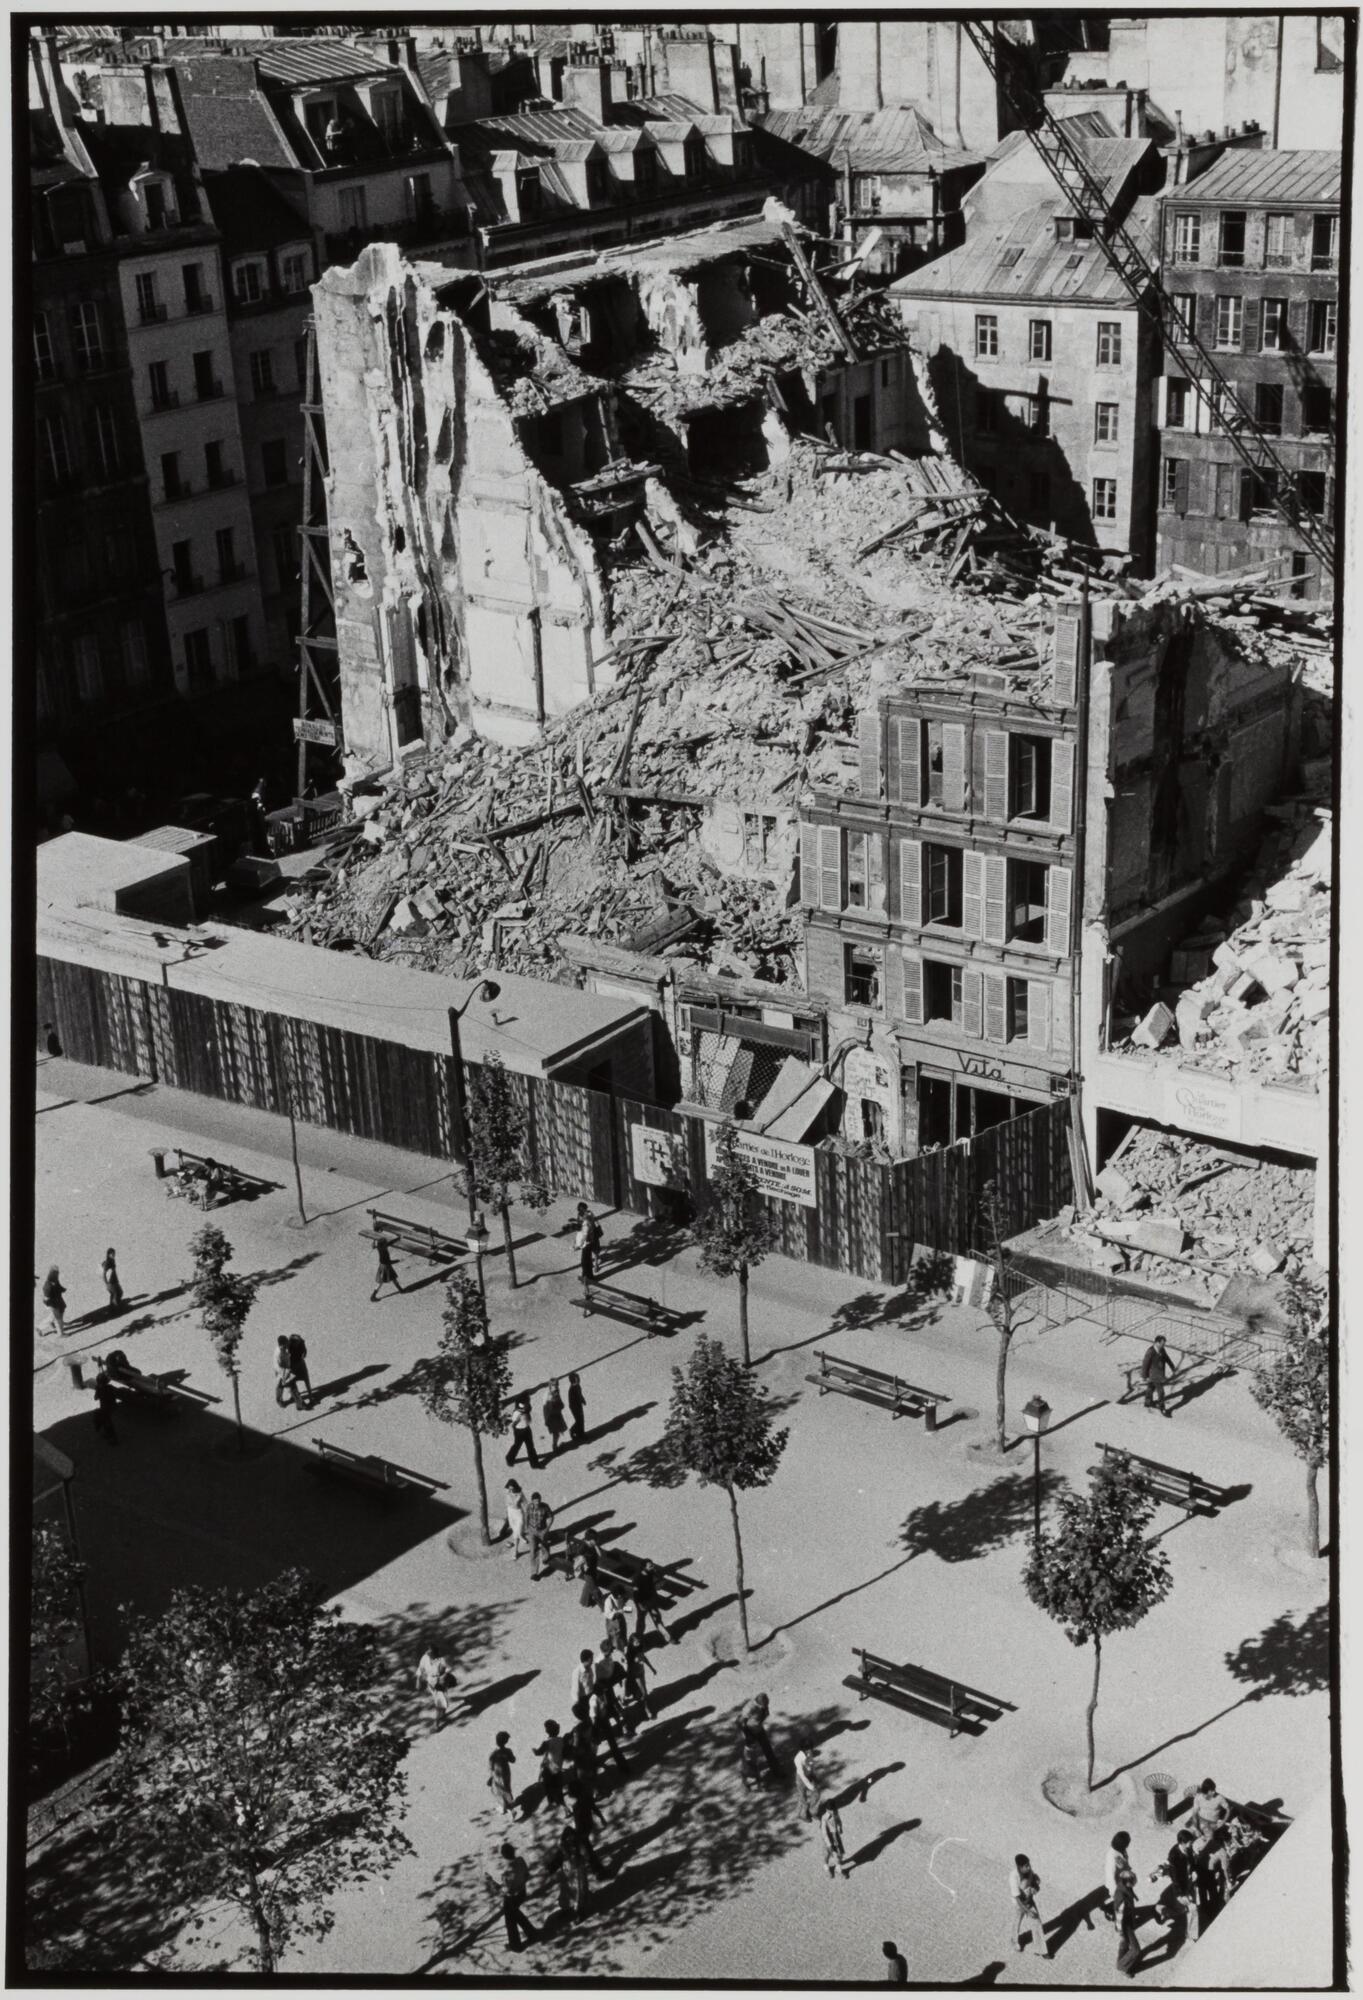 A demolished building in ruins on a city street. There is pavement and trees below.